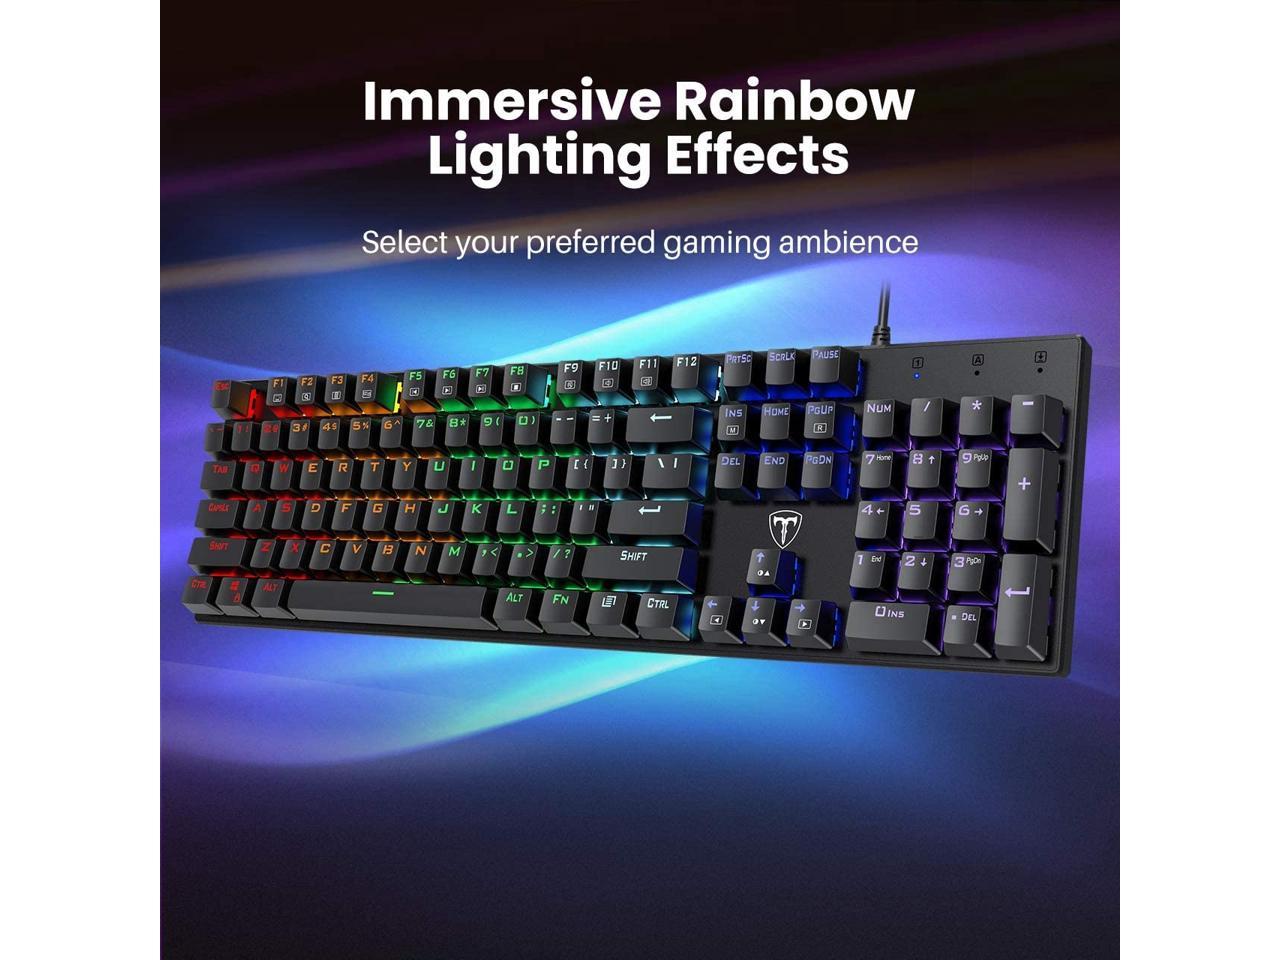 LED Backlit Wooden Portable Detachable Cable Wired Gaming Keyboard for PC/Mac Gamer 64 Key US-Layout Cacoy RGB Mechanical Keyboard Typist Cherry MX Blue Switches